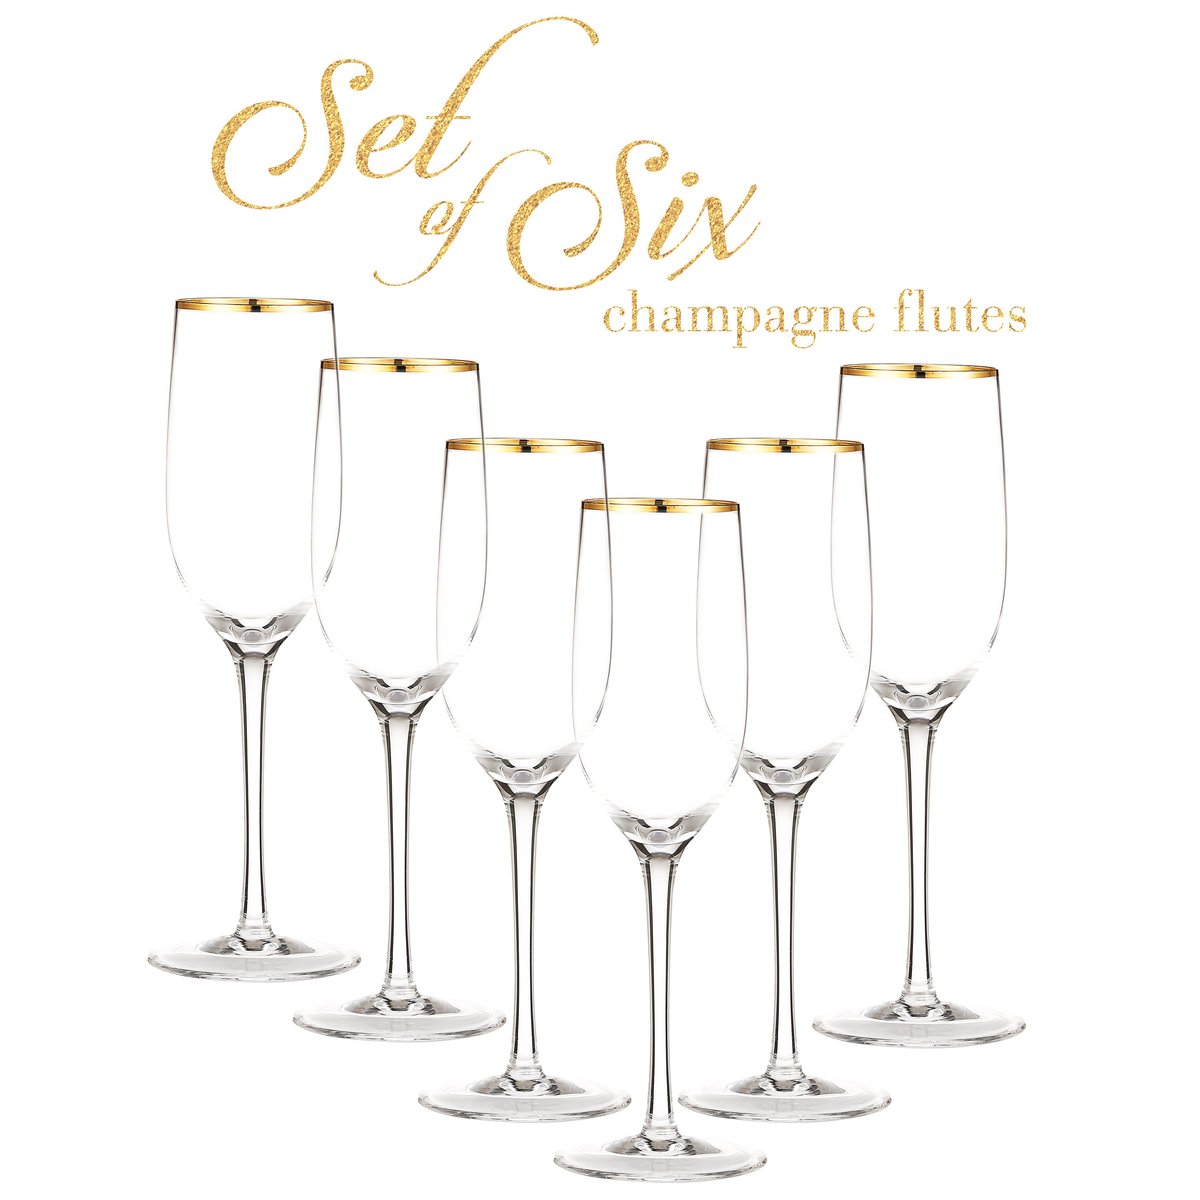 Berkware Crystal Champagne Glass with Gold Rim, Set of 6, 1